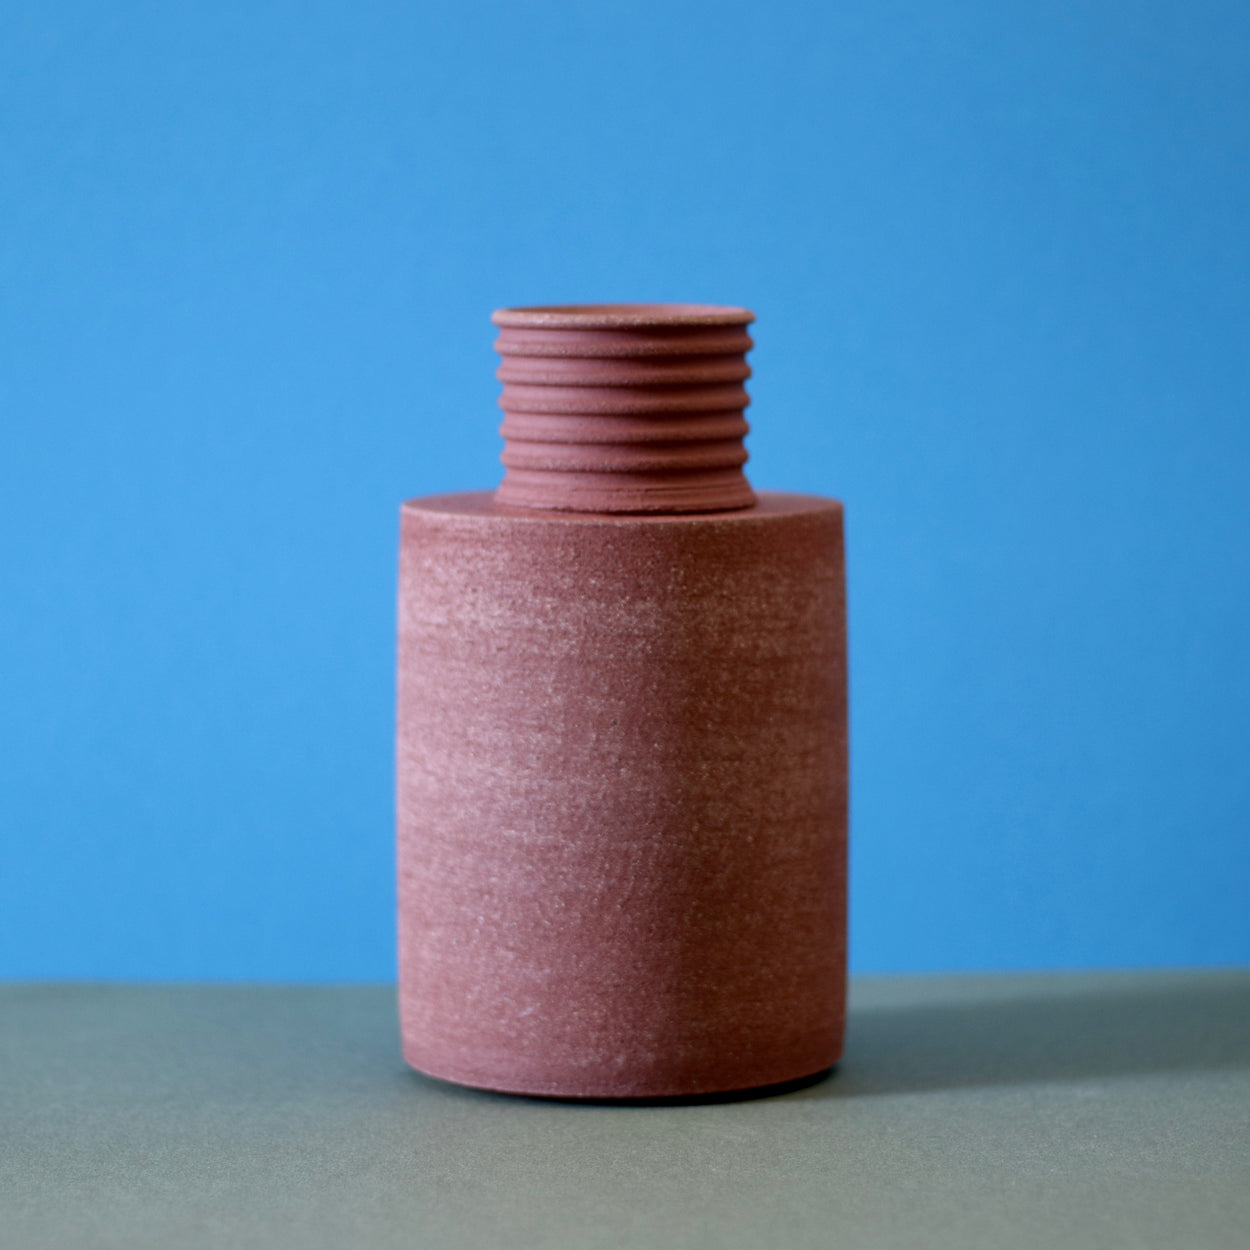 Handmade Ceramic Vase by Amanda-Sue Rope against a blue and green background.